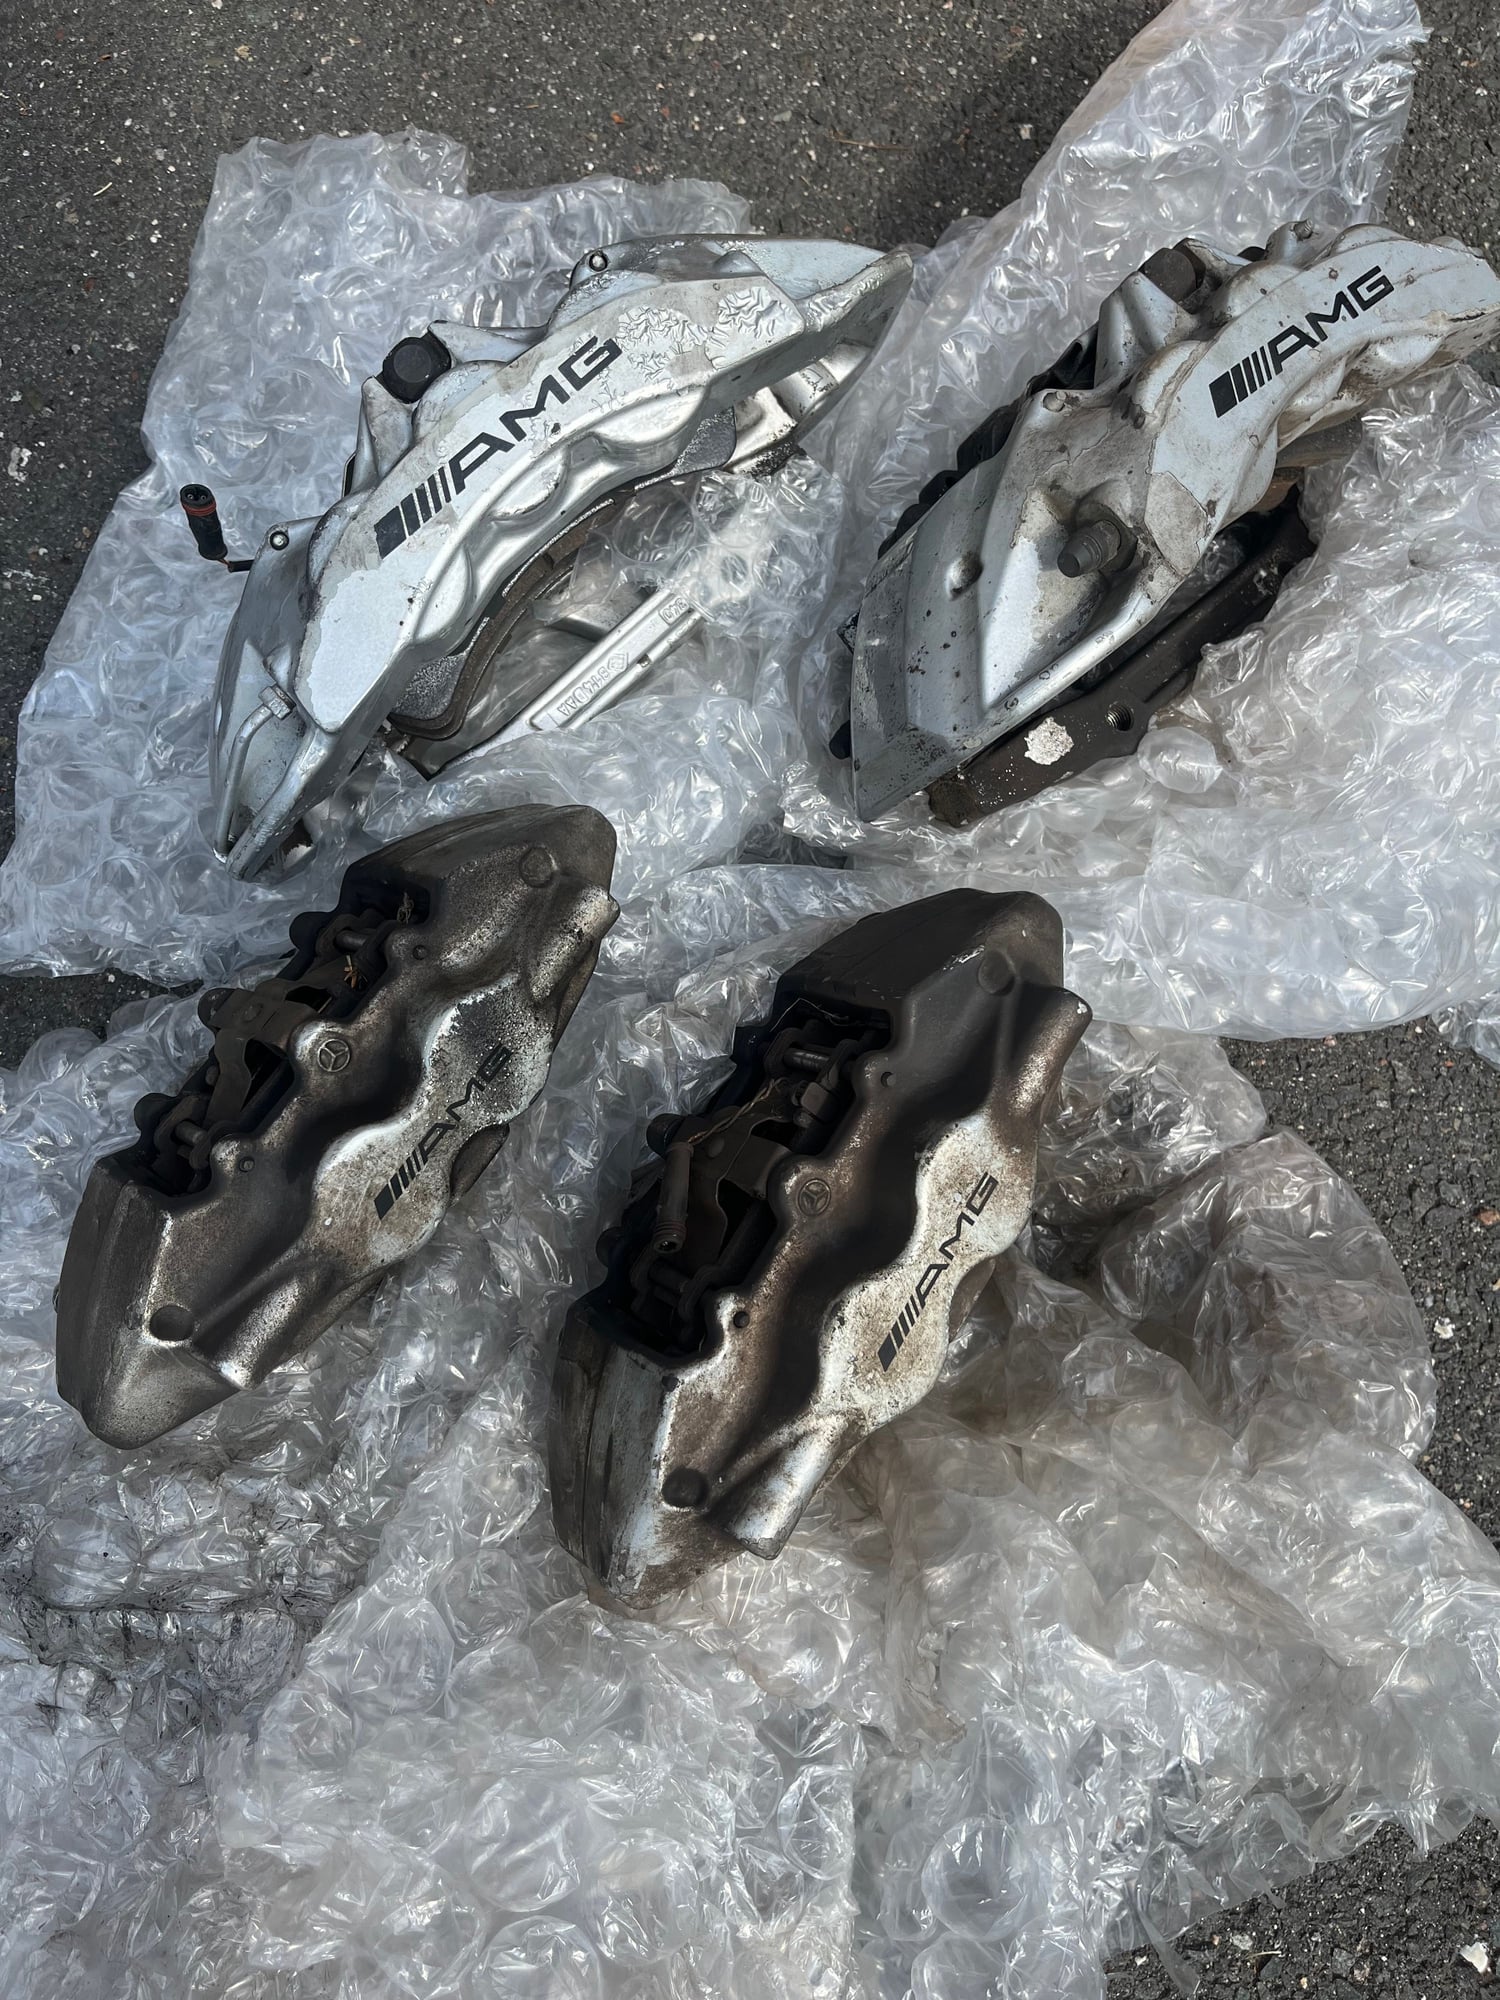 Brakes - Clk55 brake calipers - Used - 0  All Models - West Hartford, CT 06107, United States